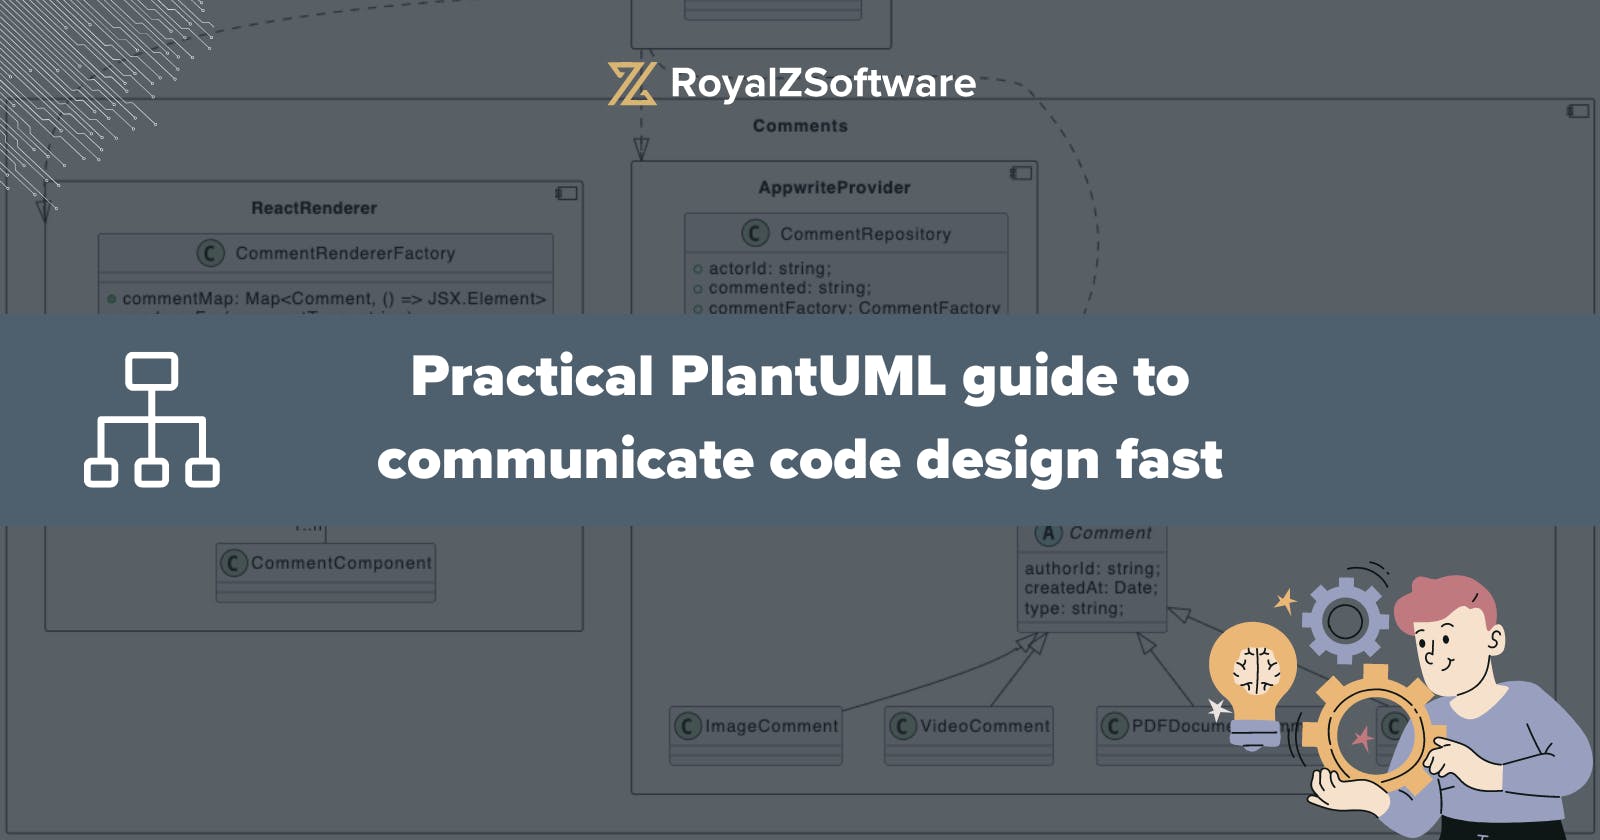 Use PlantUML to communicate your architecture ideas better